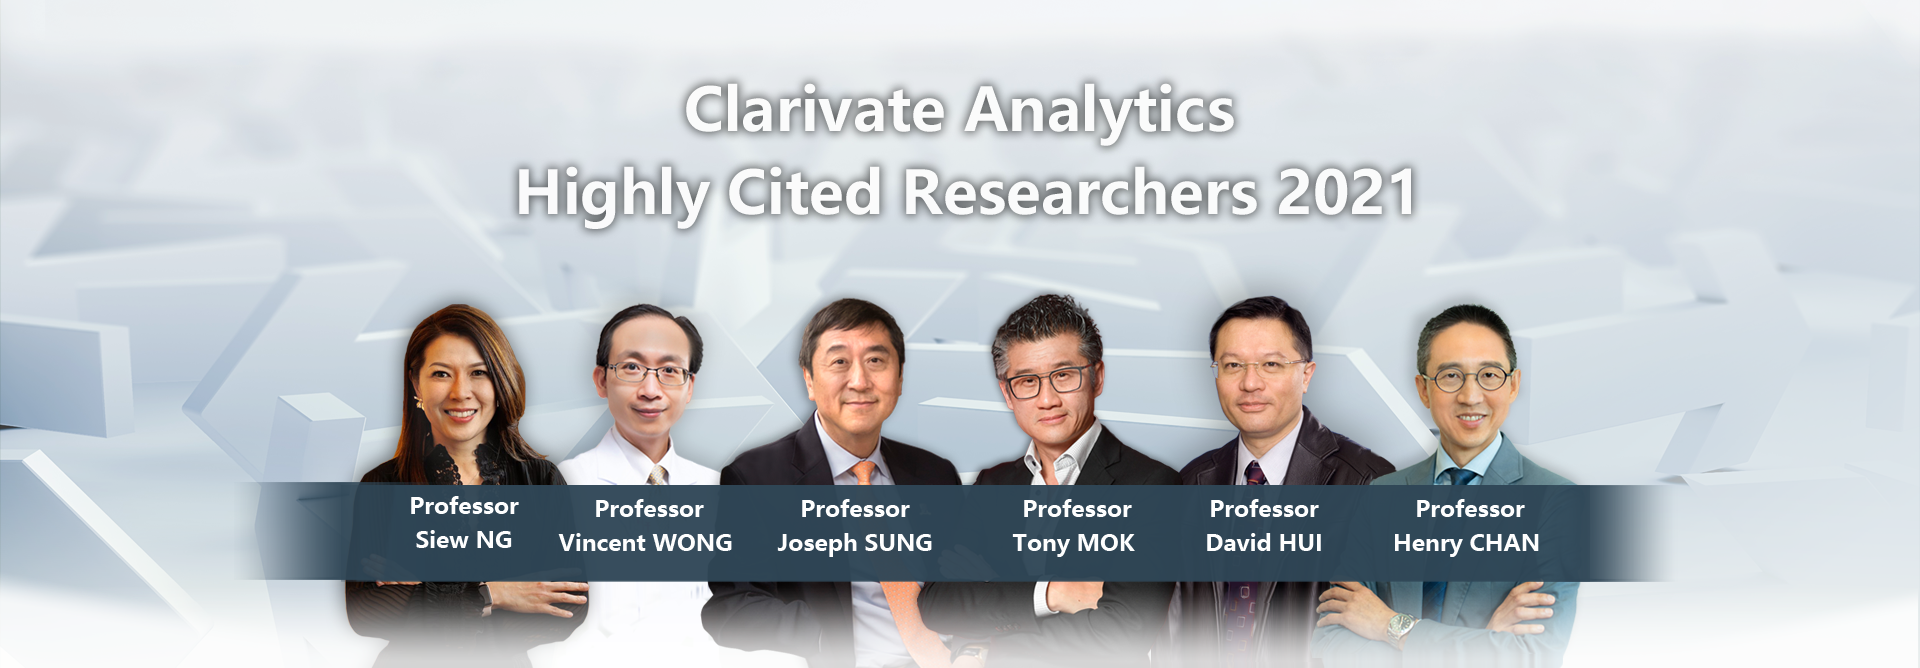 Clarivate Analytics Highly Cited Researchers 2021